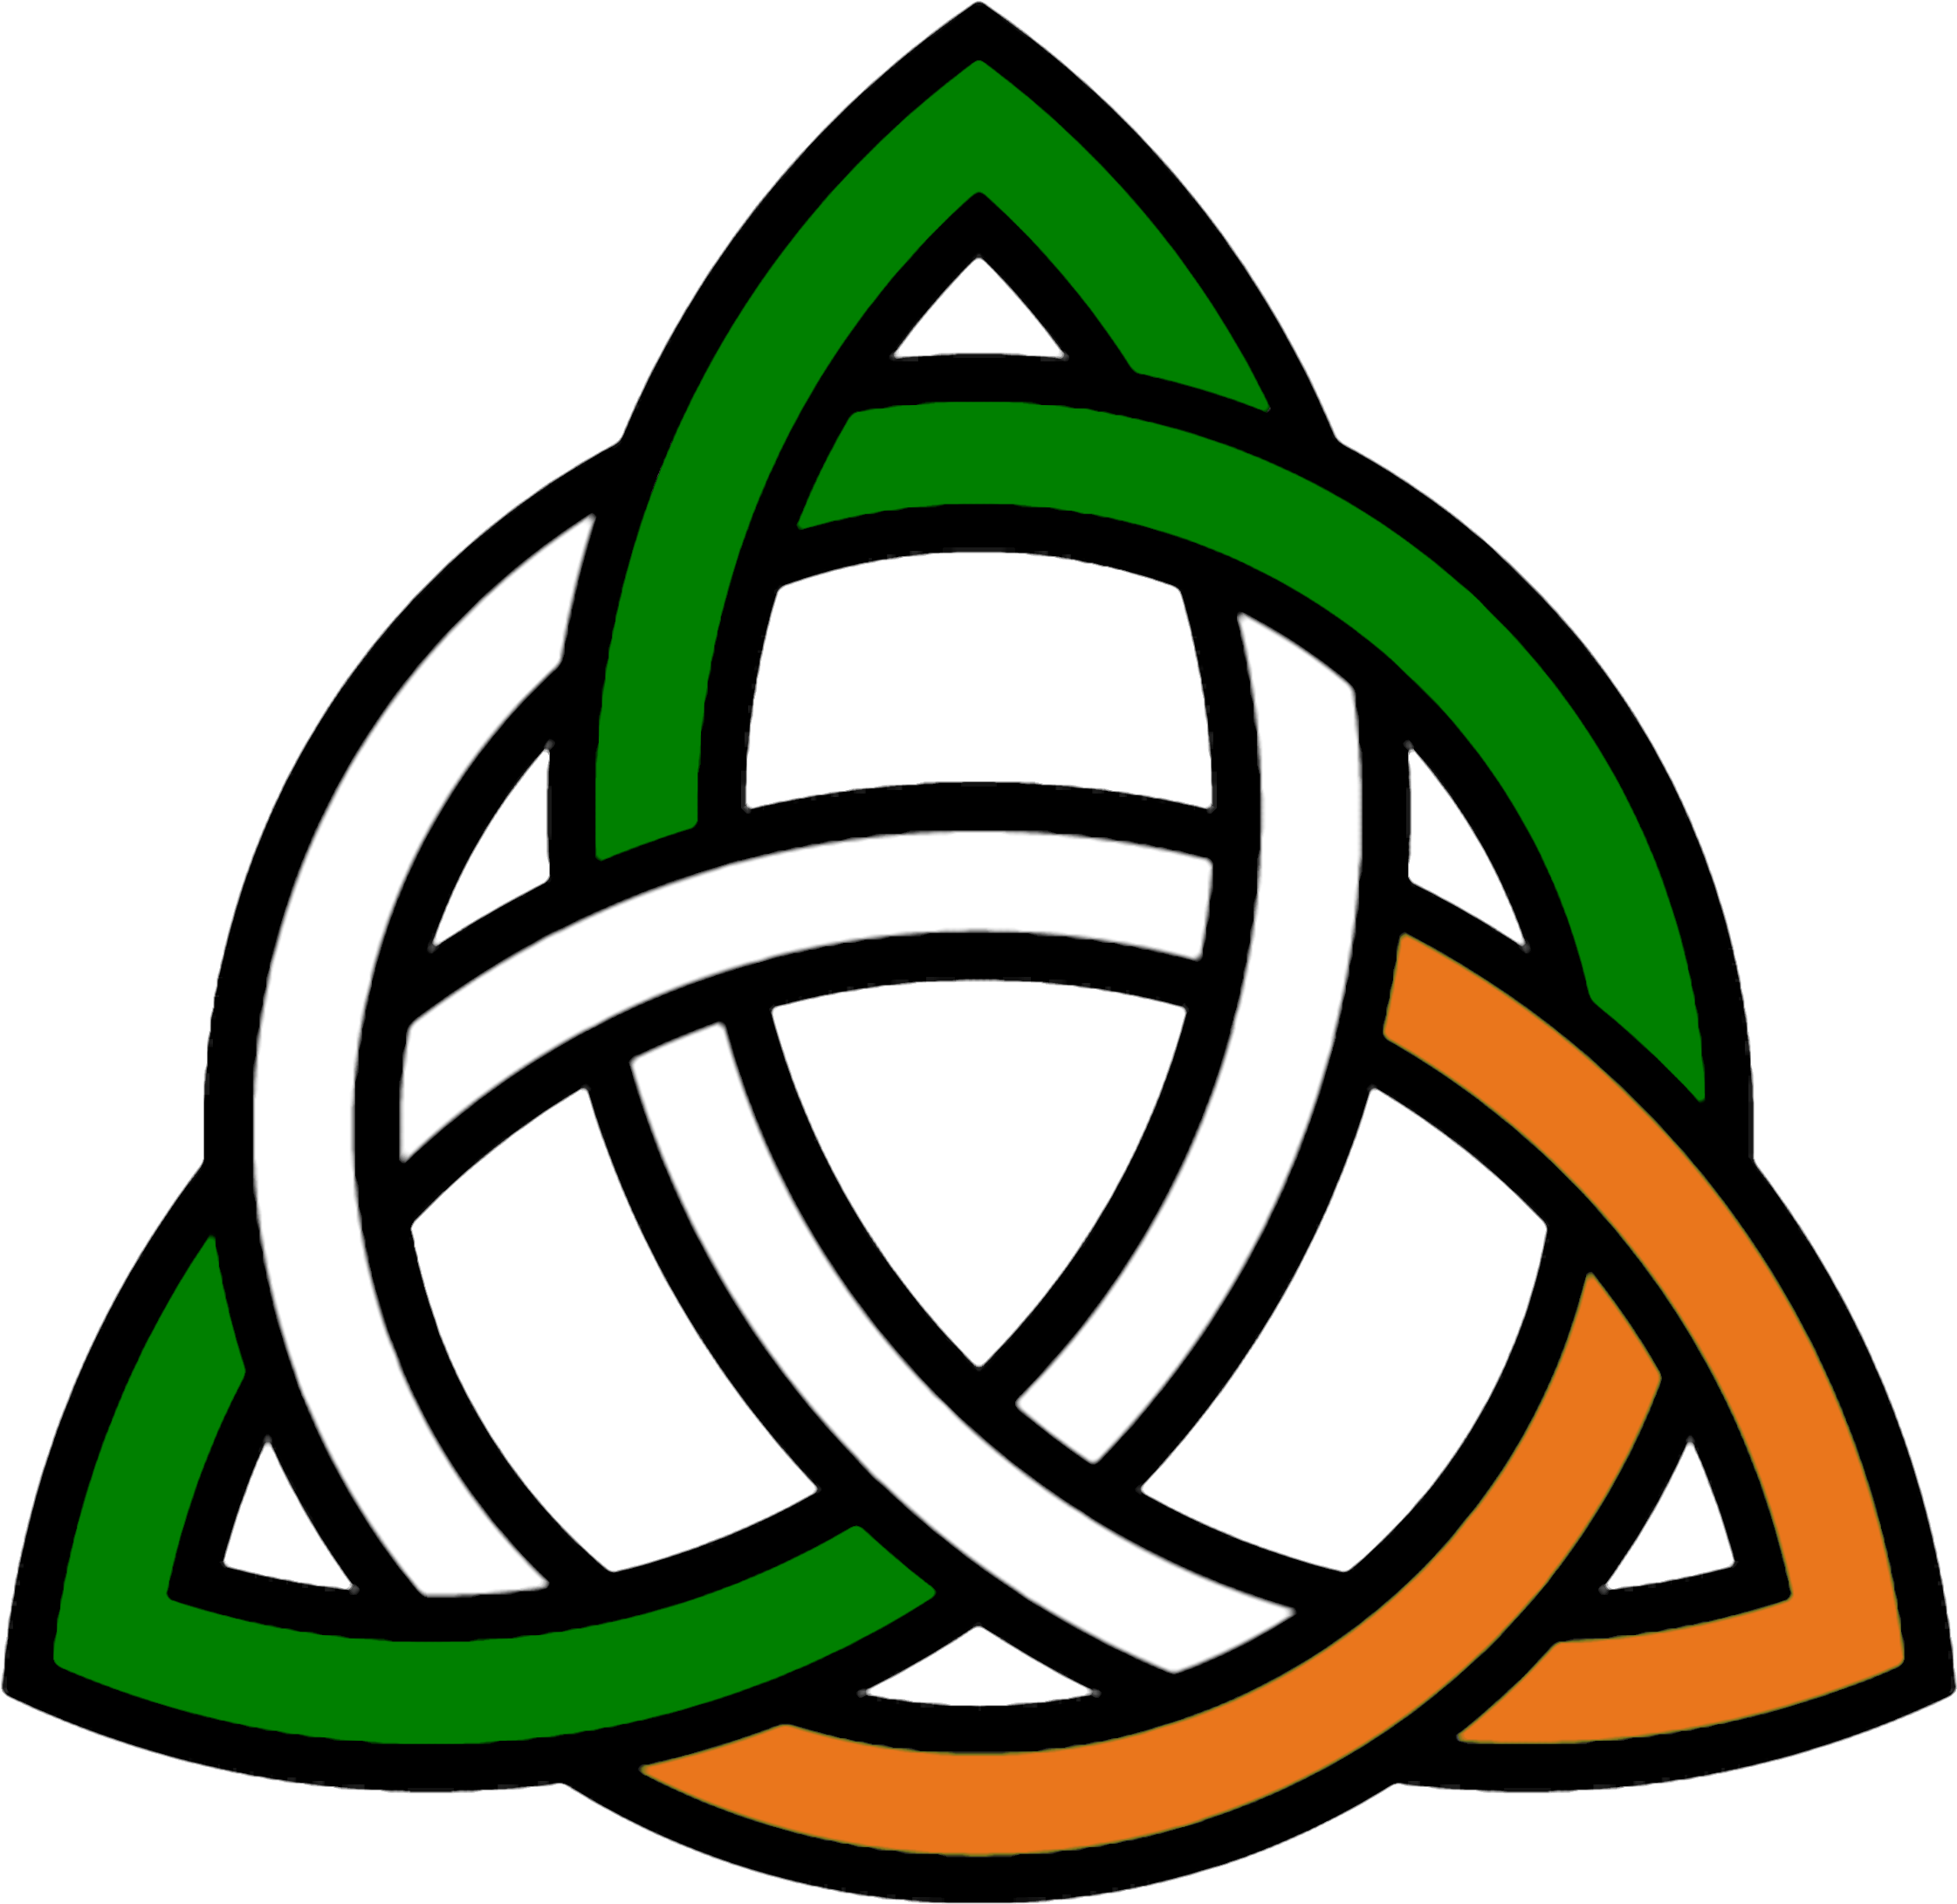 A Triquetra Symbol With Green Orange And White Colors